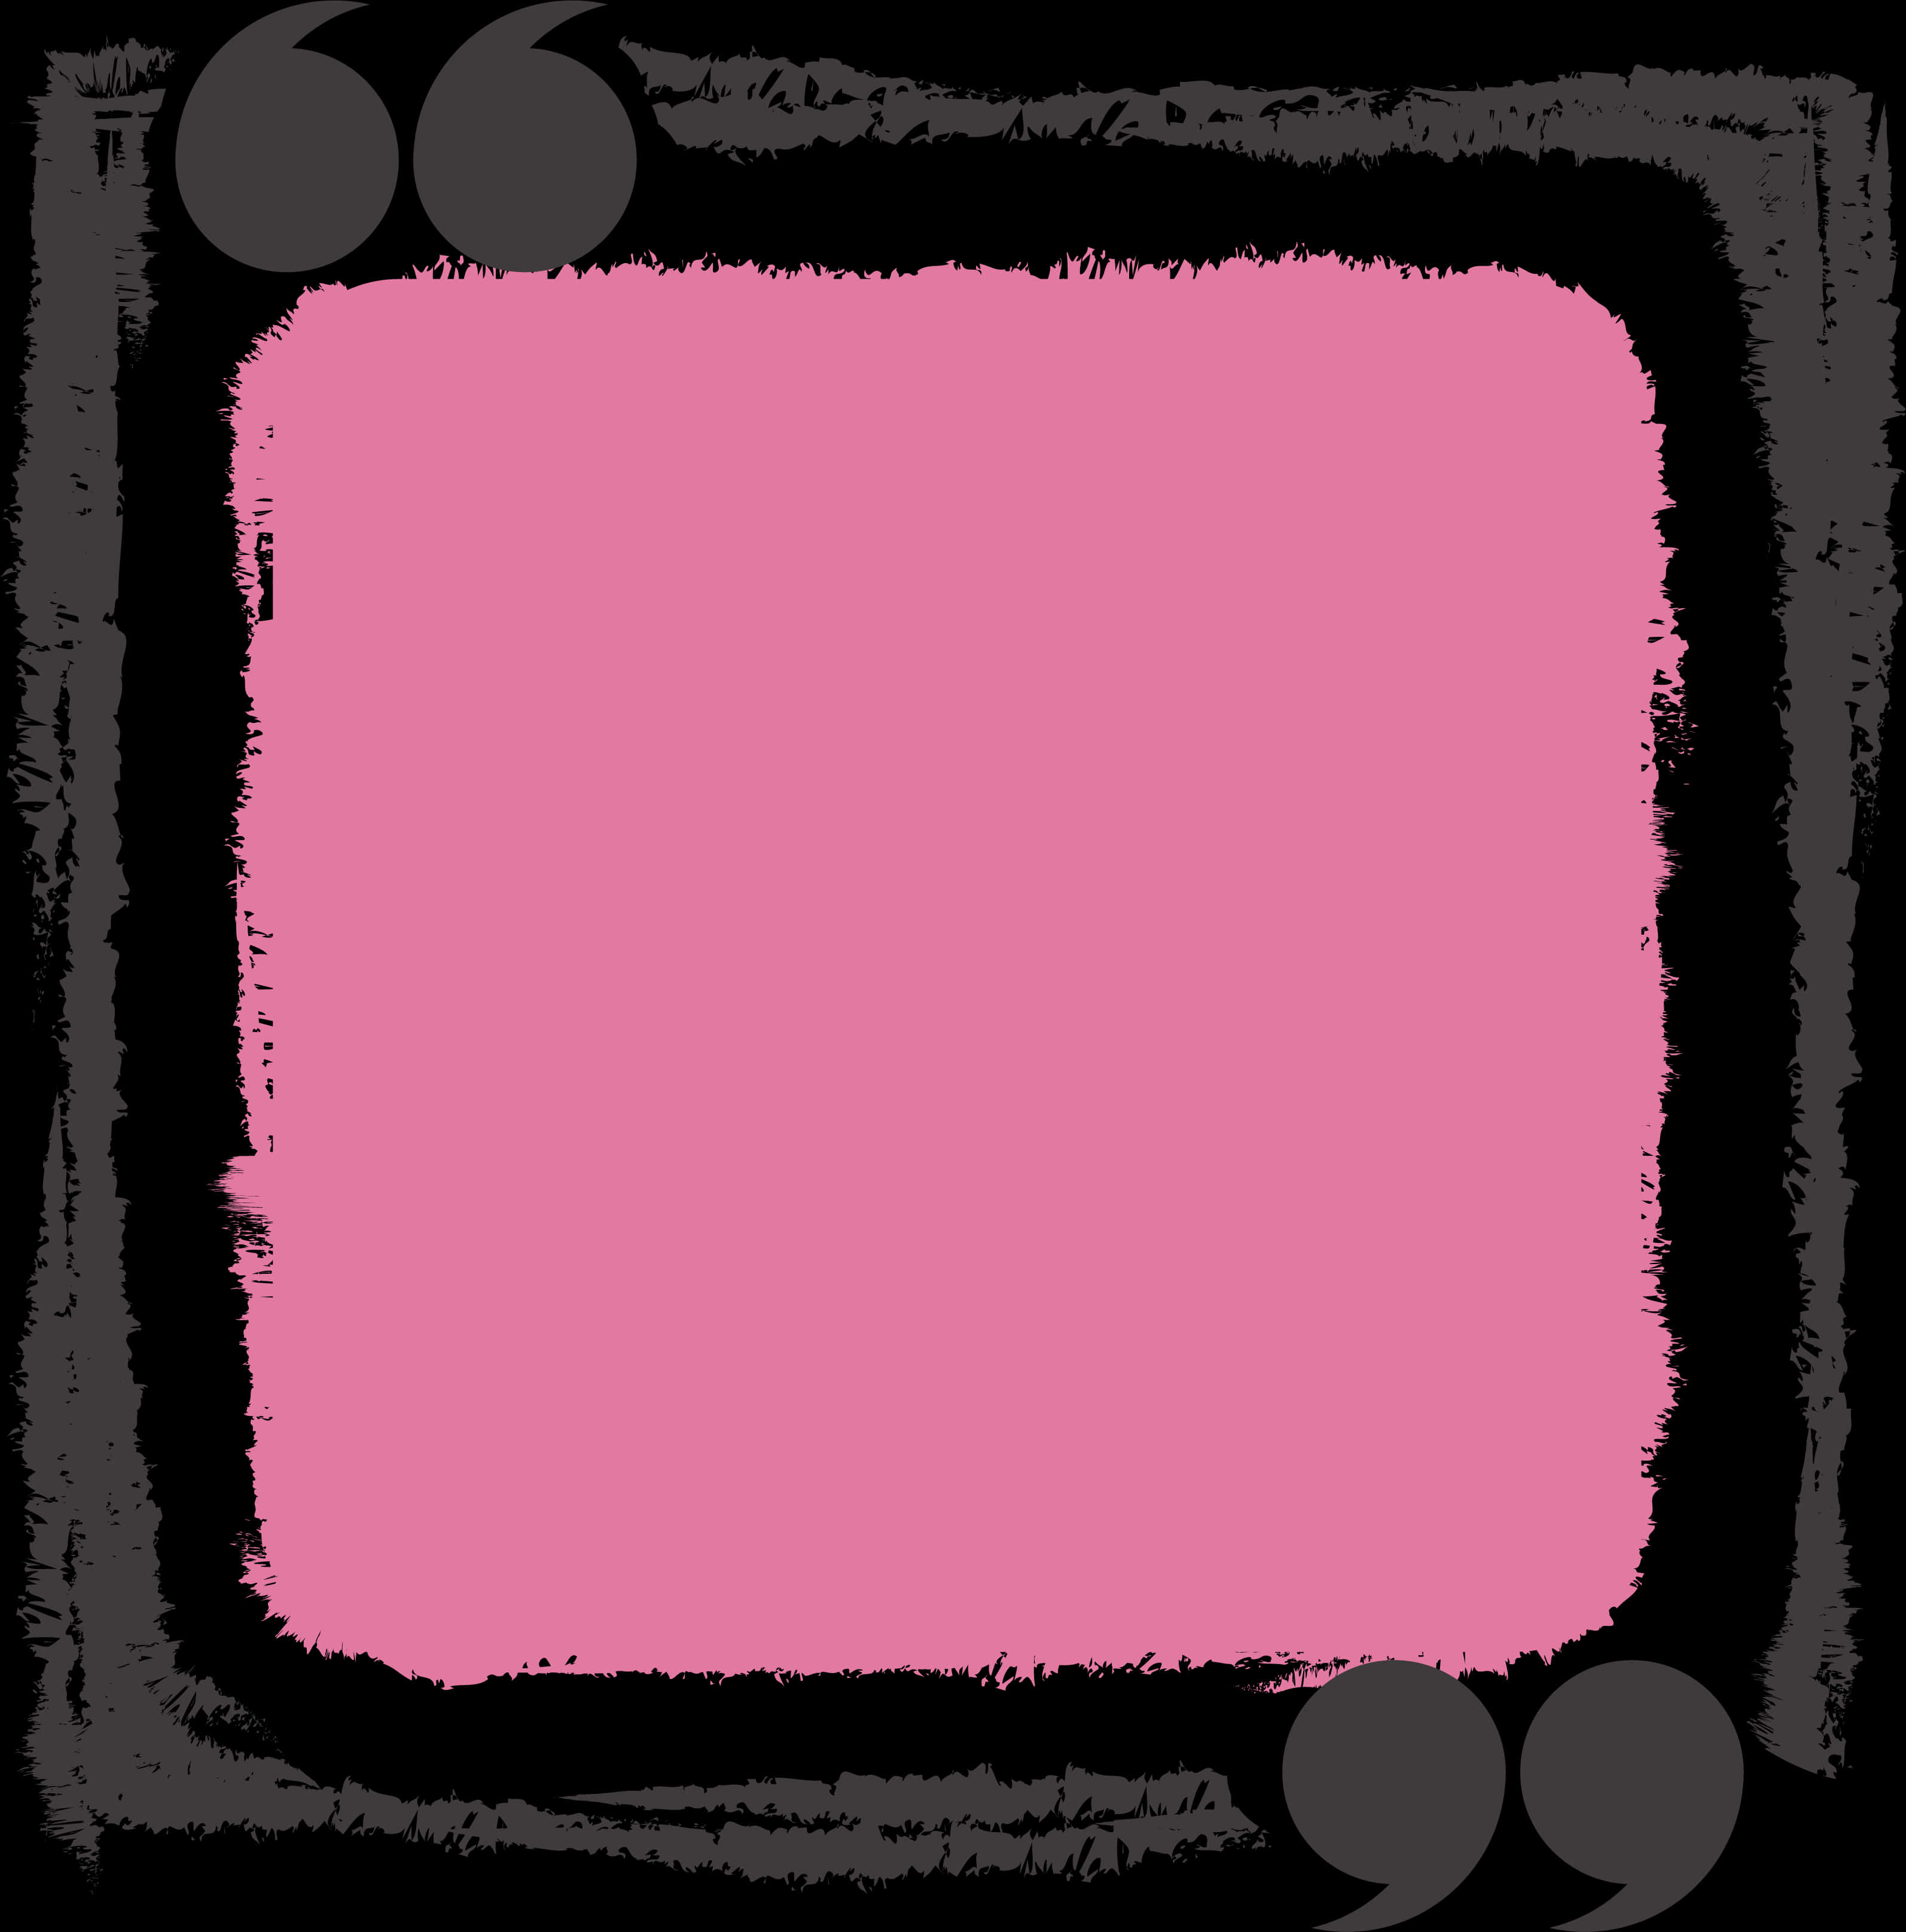 A Pink Square With A Black Border